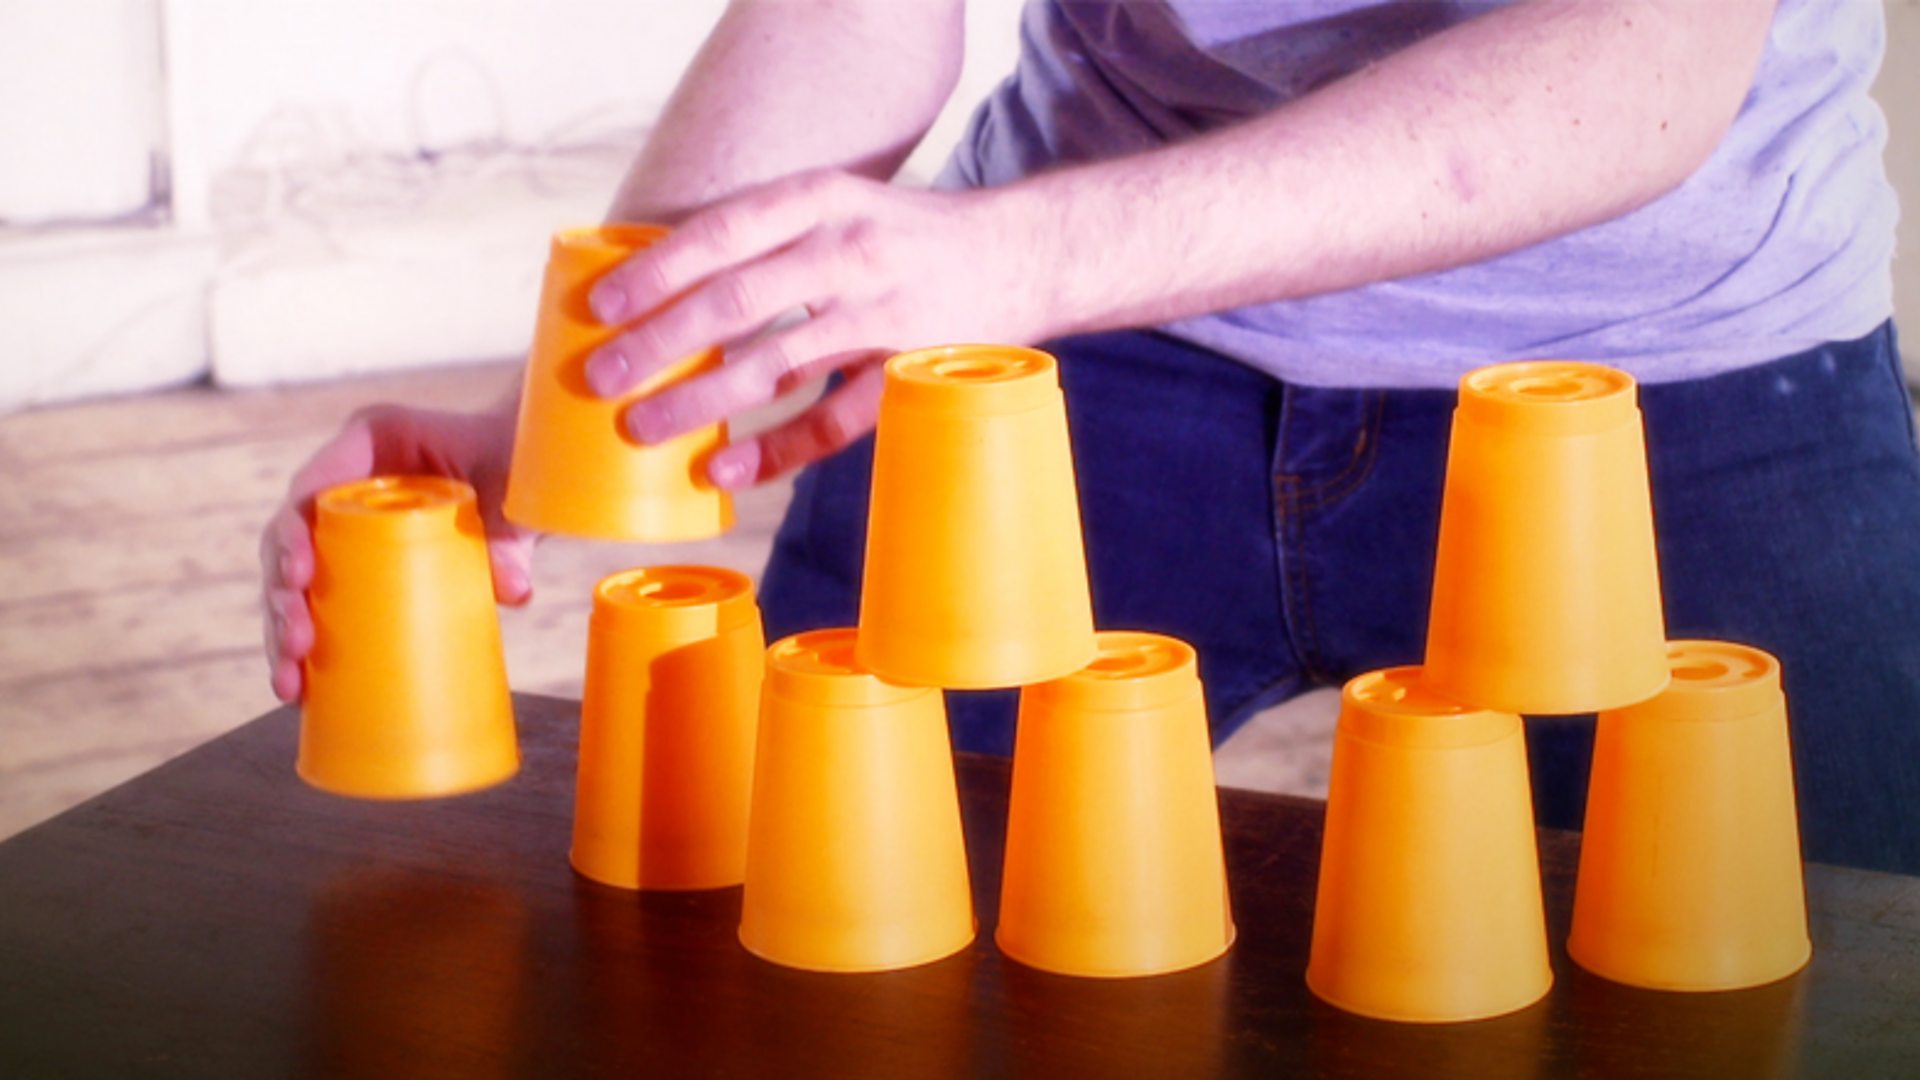 BBC - Make Your Move, Movement - The Speed Stacking Challenge - #MakeYourMove